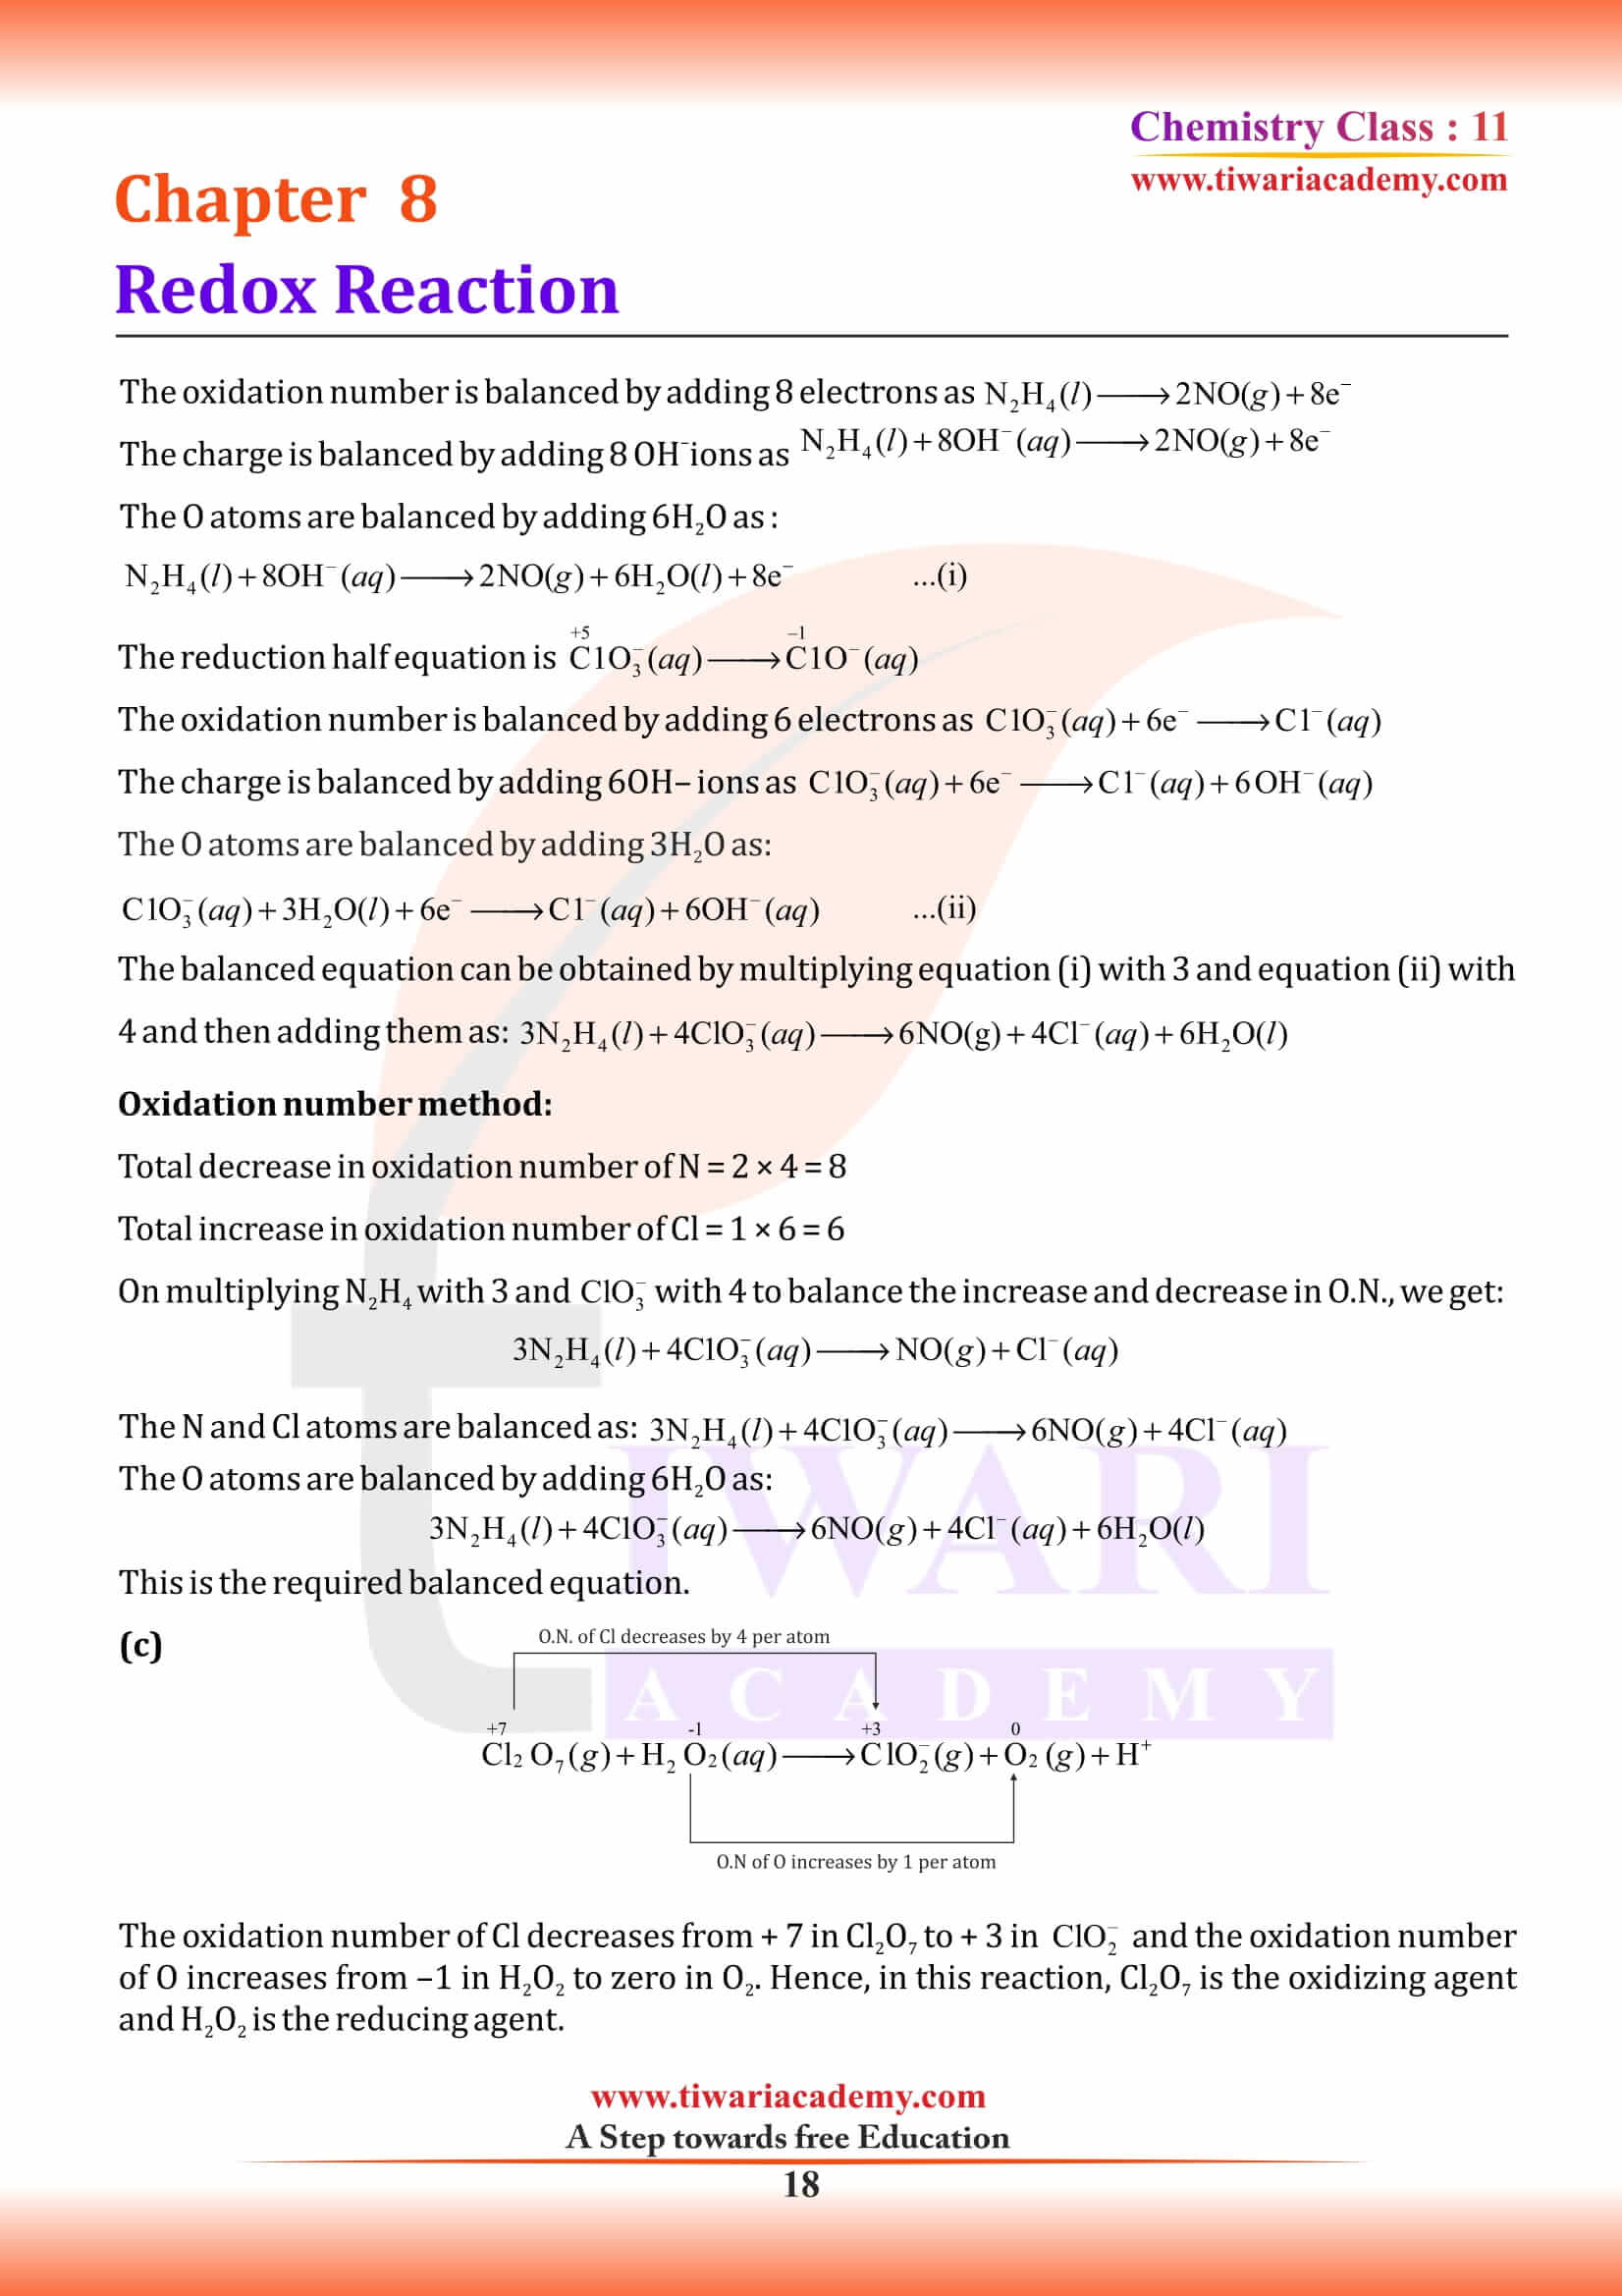 NCERT Solutions for Class 11 Chemistry Chapter 8 ans